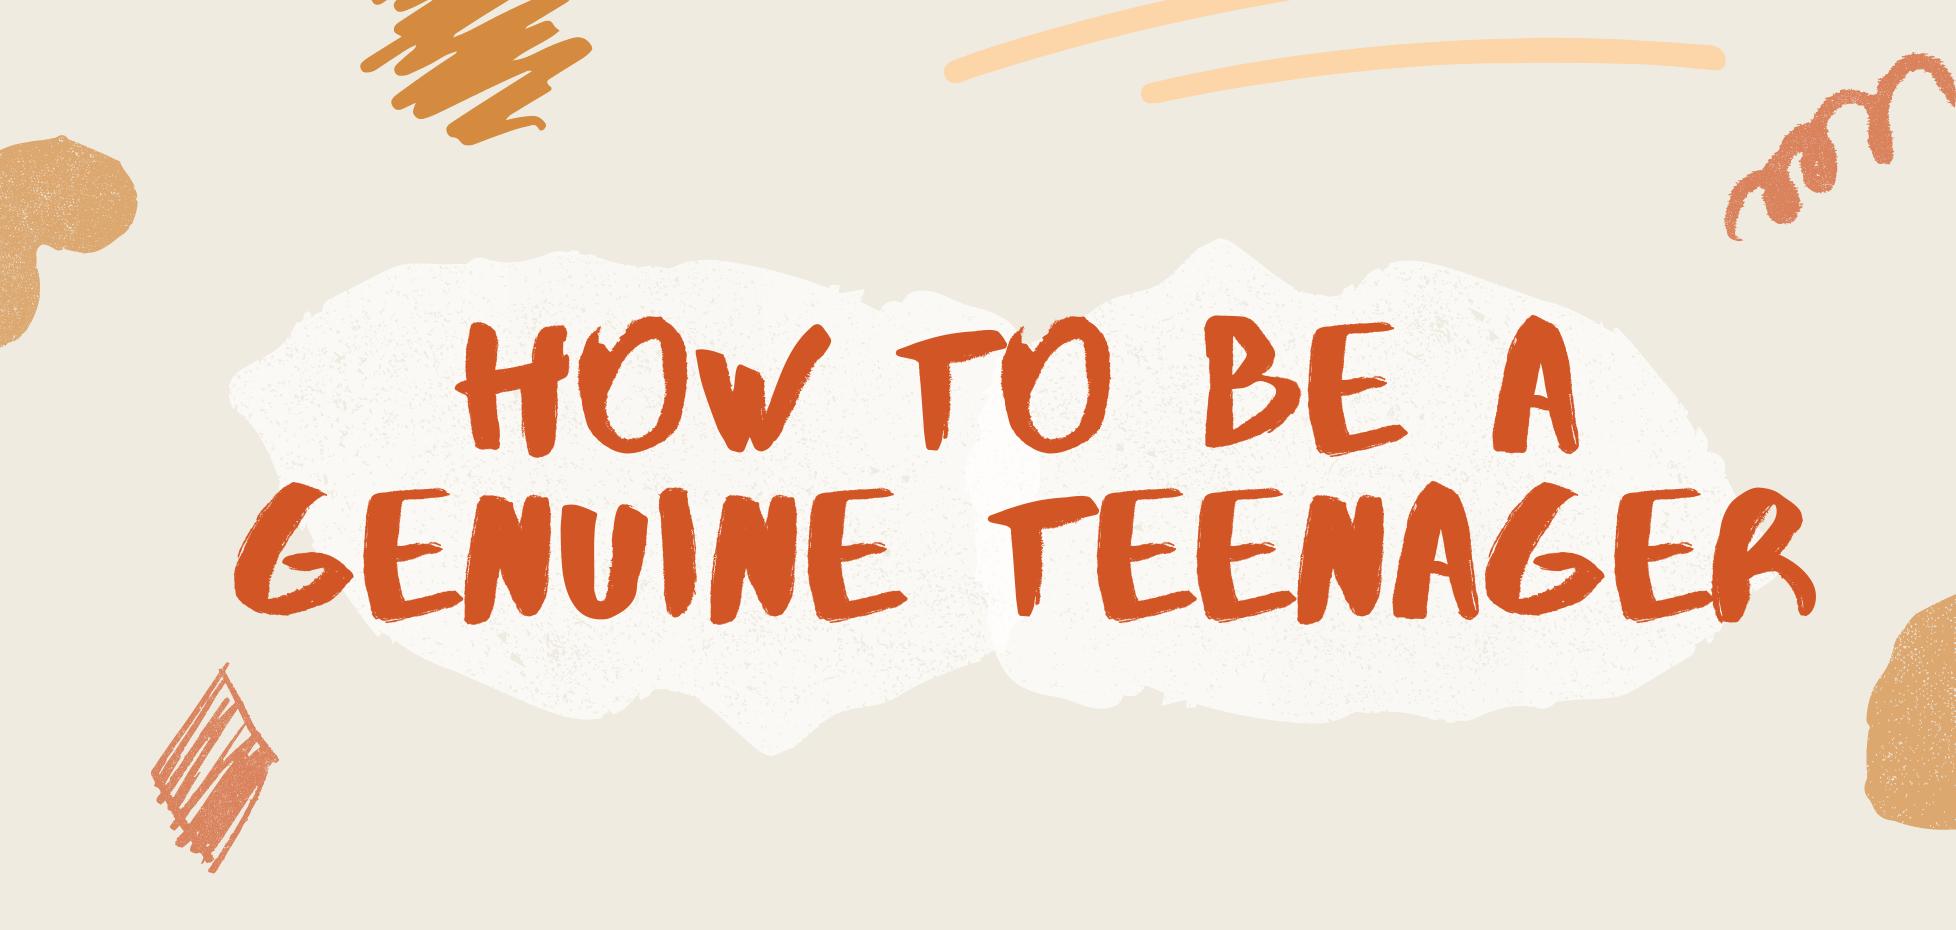 How to be a Genuine Teenager